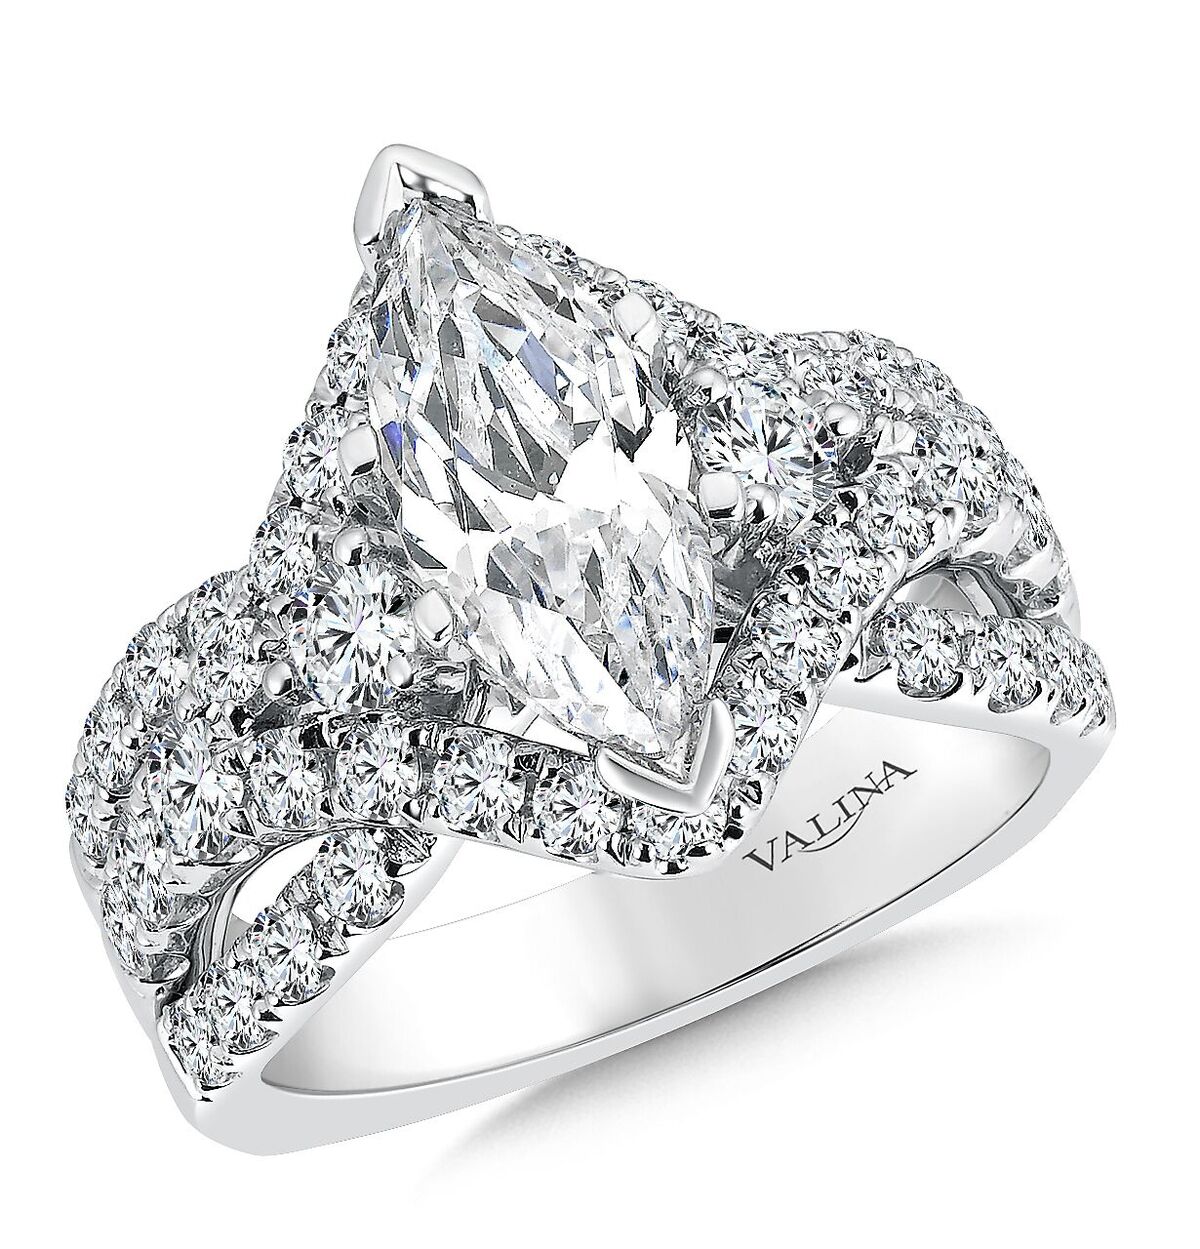 Marquise Diamond Engagement Ring - Wholesale Engagement Rings (1)